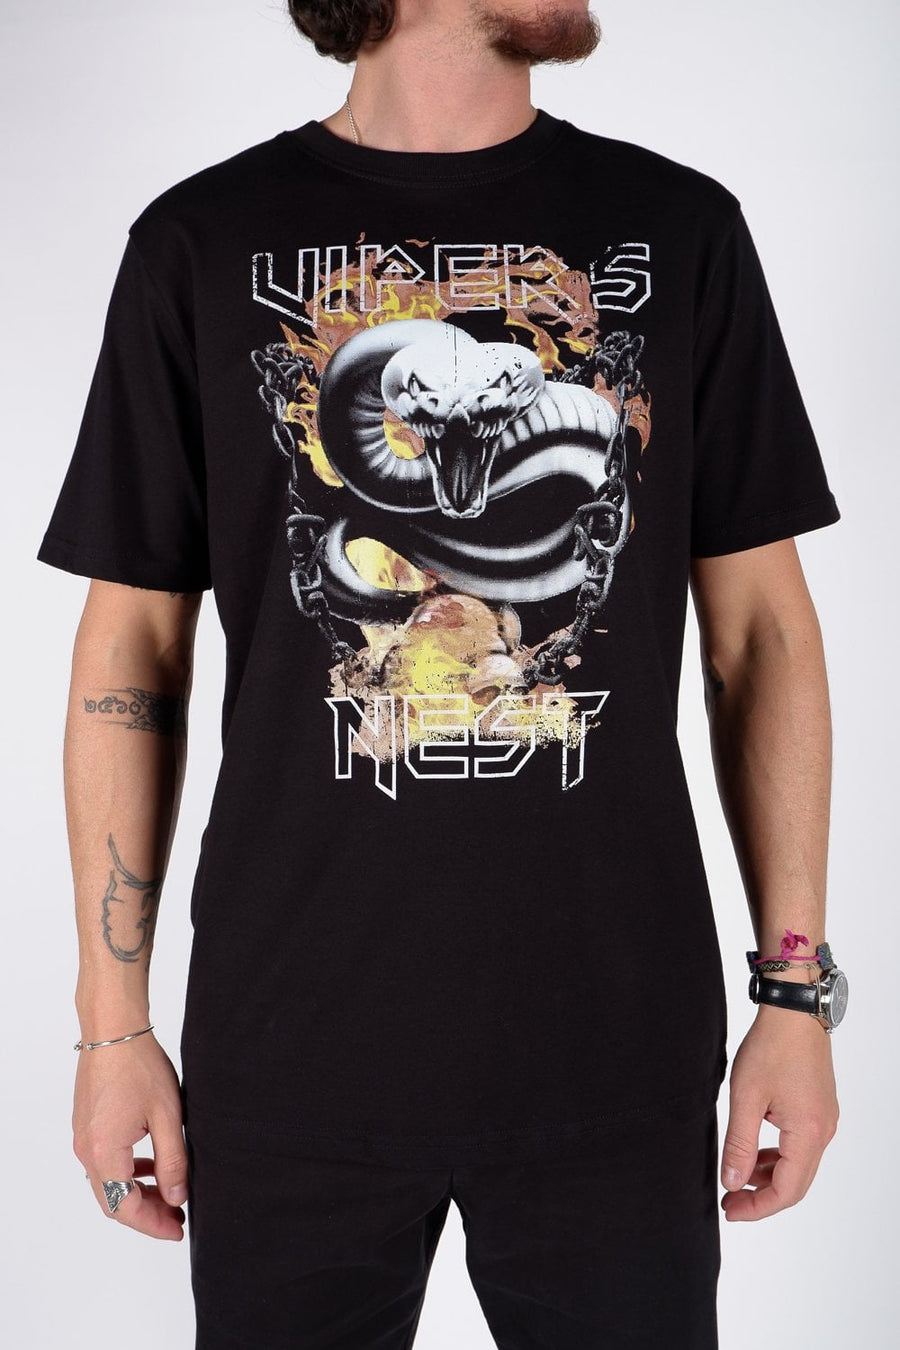 Buy the ABE Viper s Nest T-Shirt in Black at Intro. Spend £50 for free UK delivery. Official stockists. We ship worldwide.